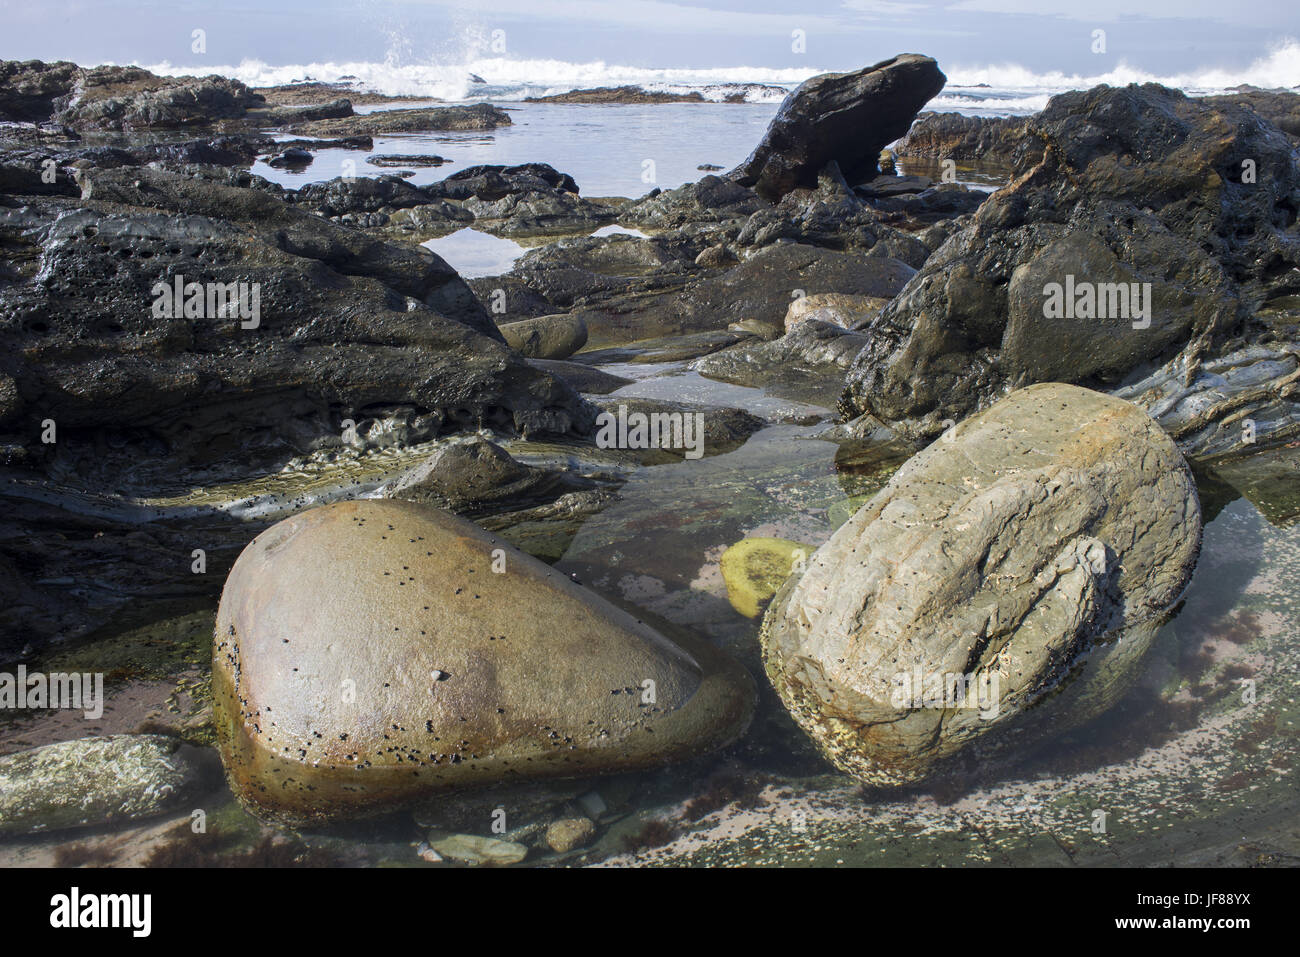 Two Boulders in shallow water Stock Photo